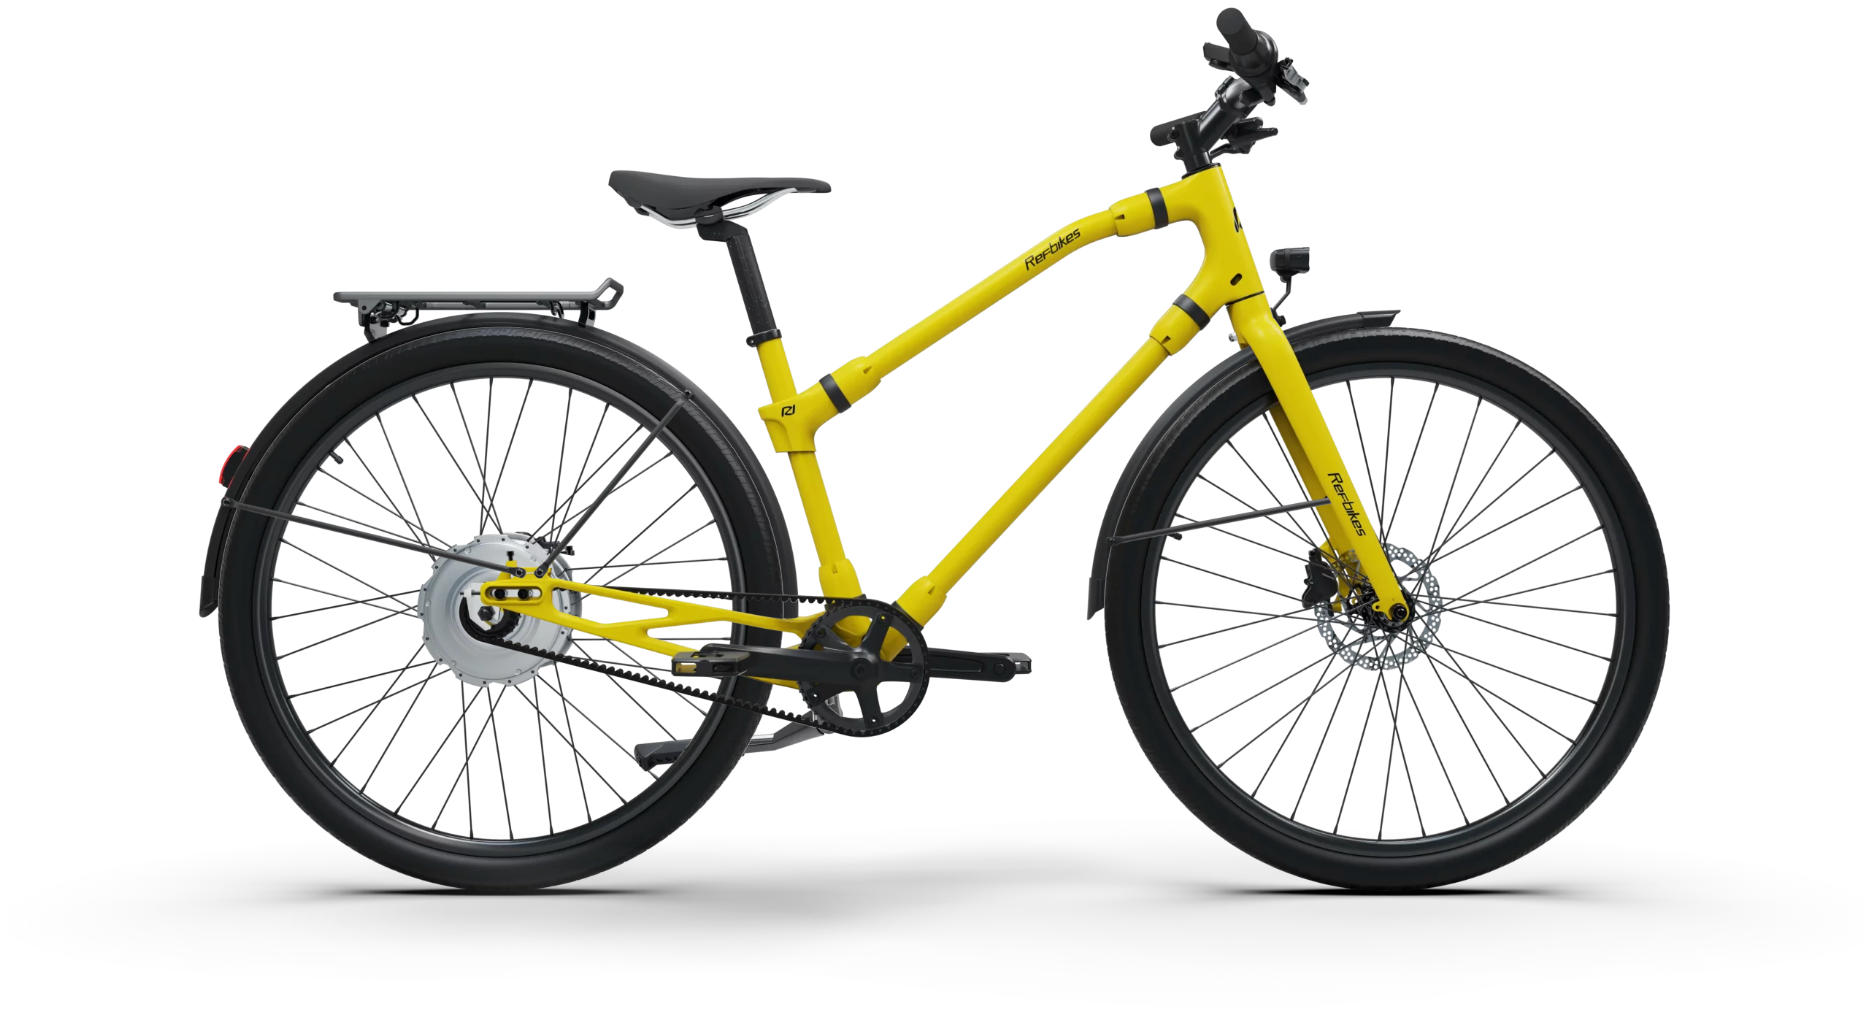 Ref Urban Boost electric bike in vivid yellow with sturdy black tires and sleek frame design.